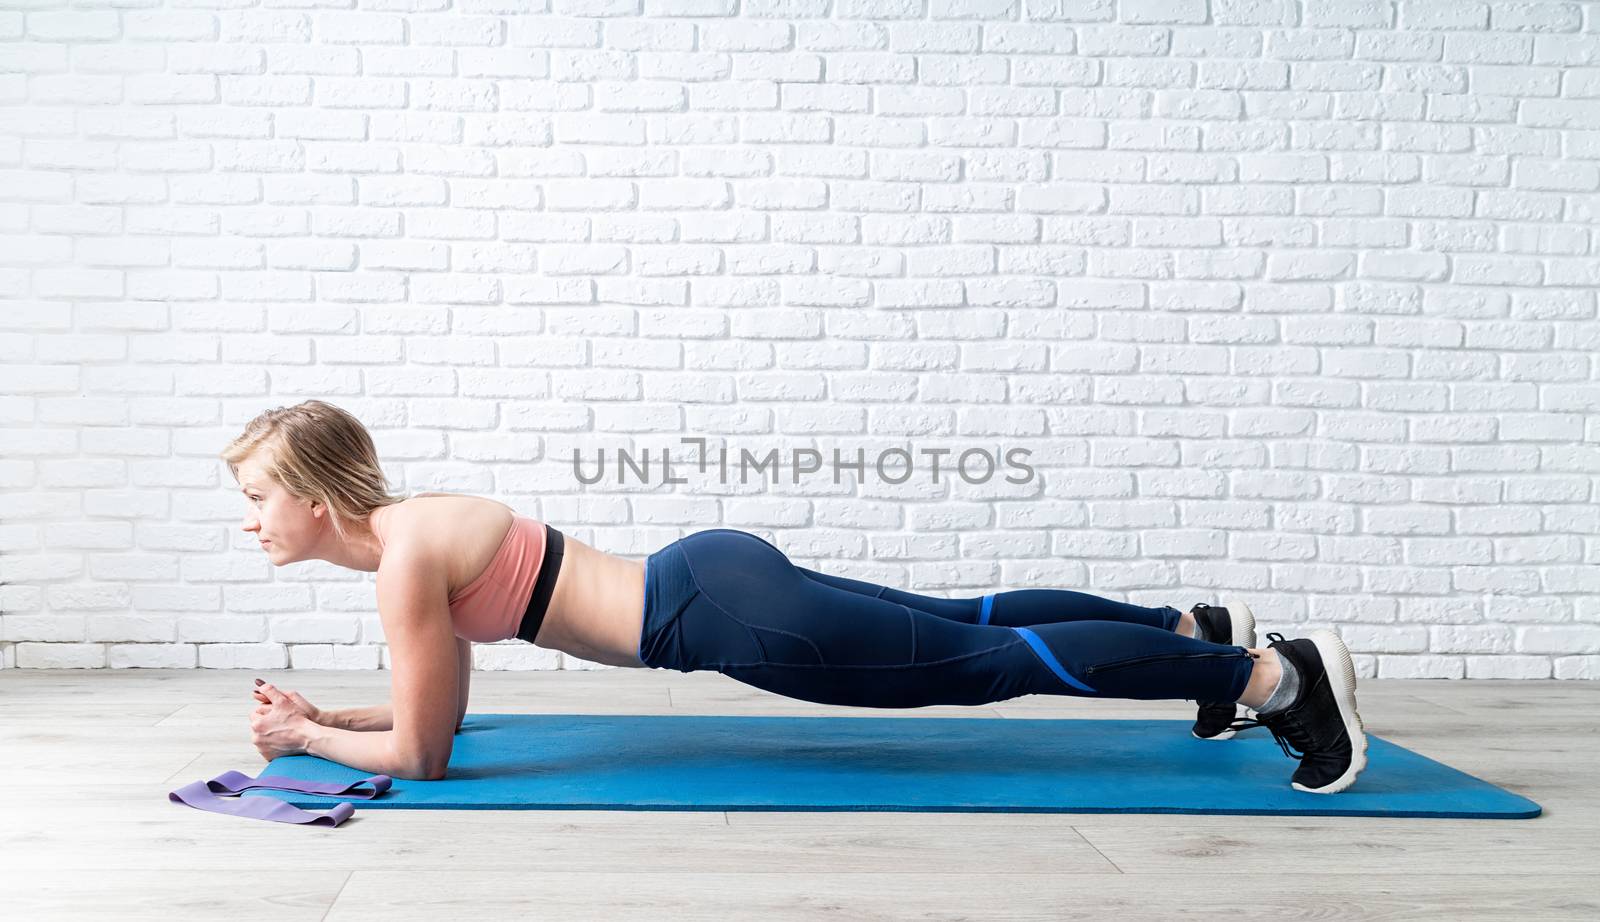 Stay home. Home fitness. Young blond woman doing plank at home, white brick wall and wooden floor